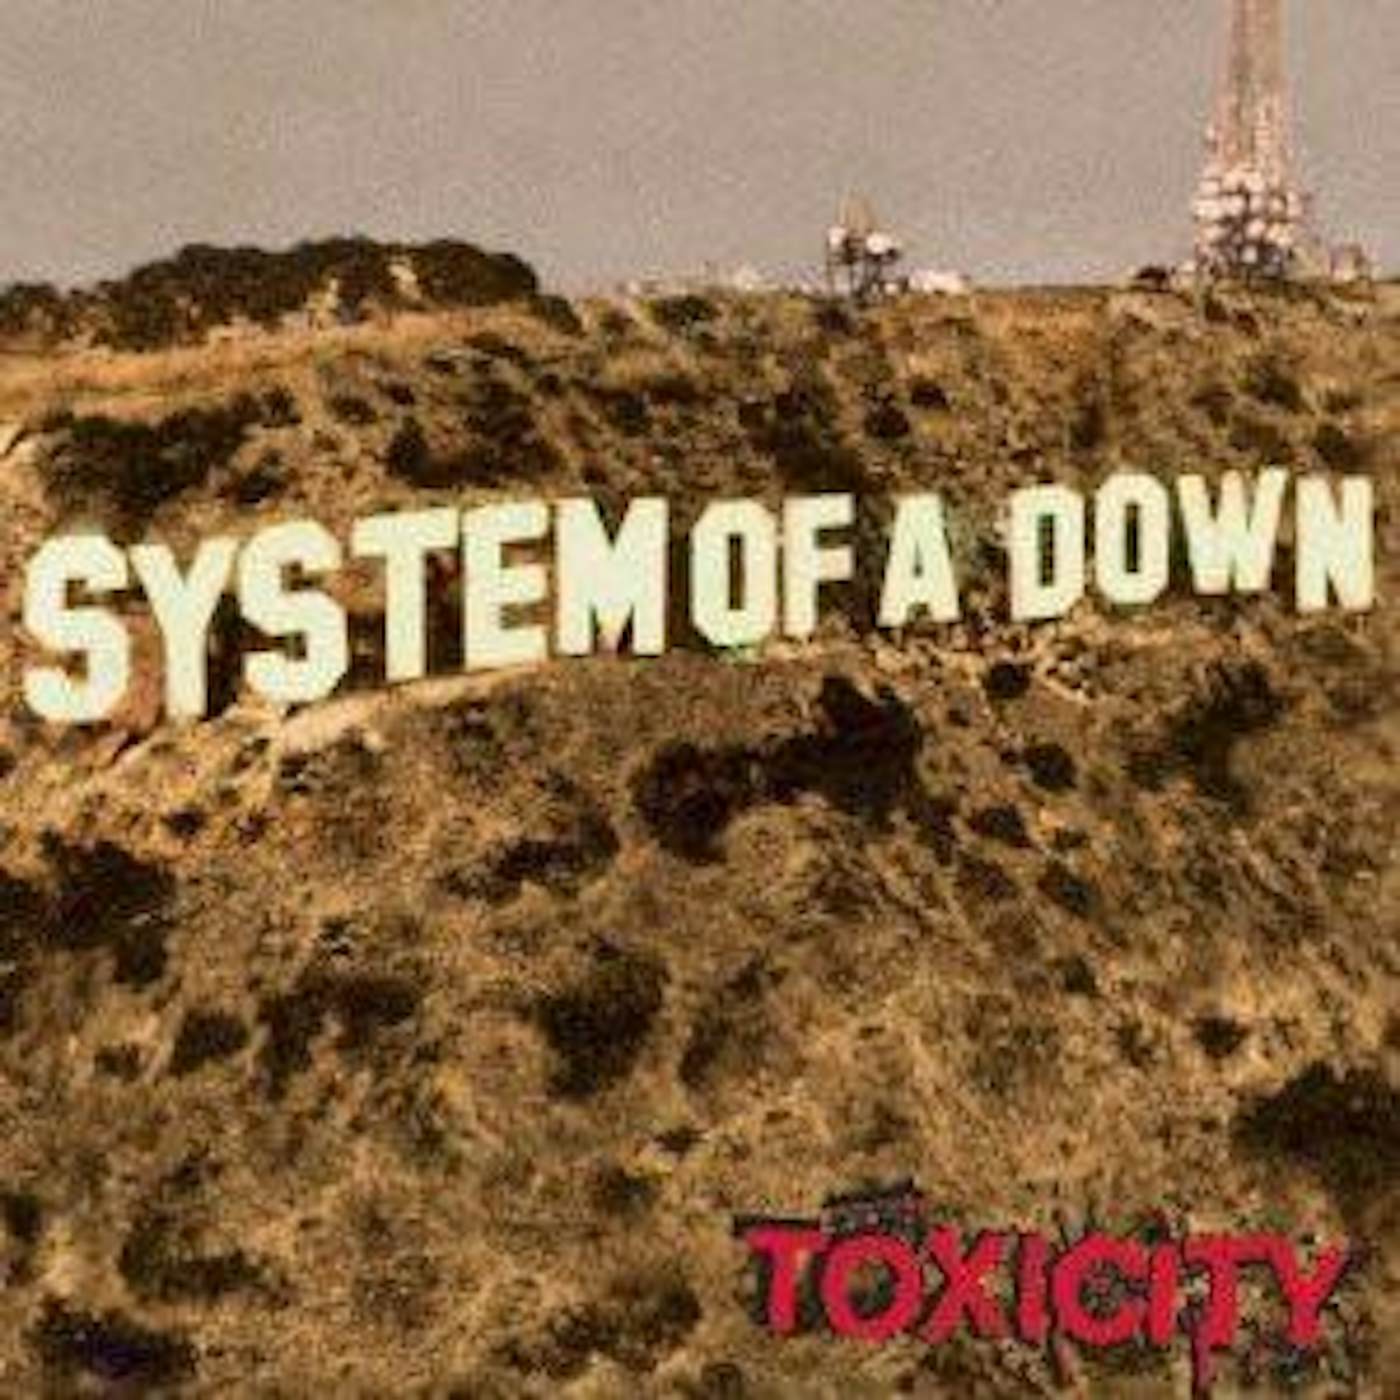 System Of A Down TOXICITY CD